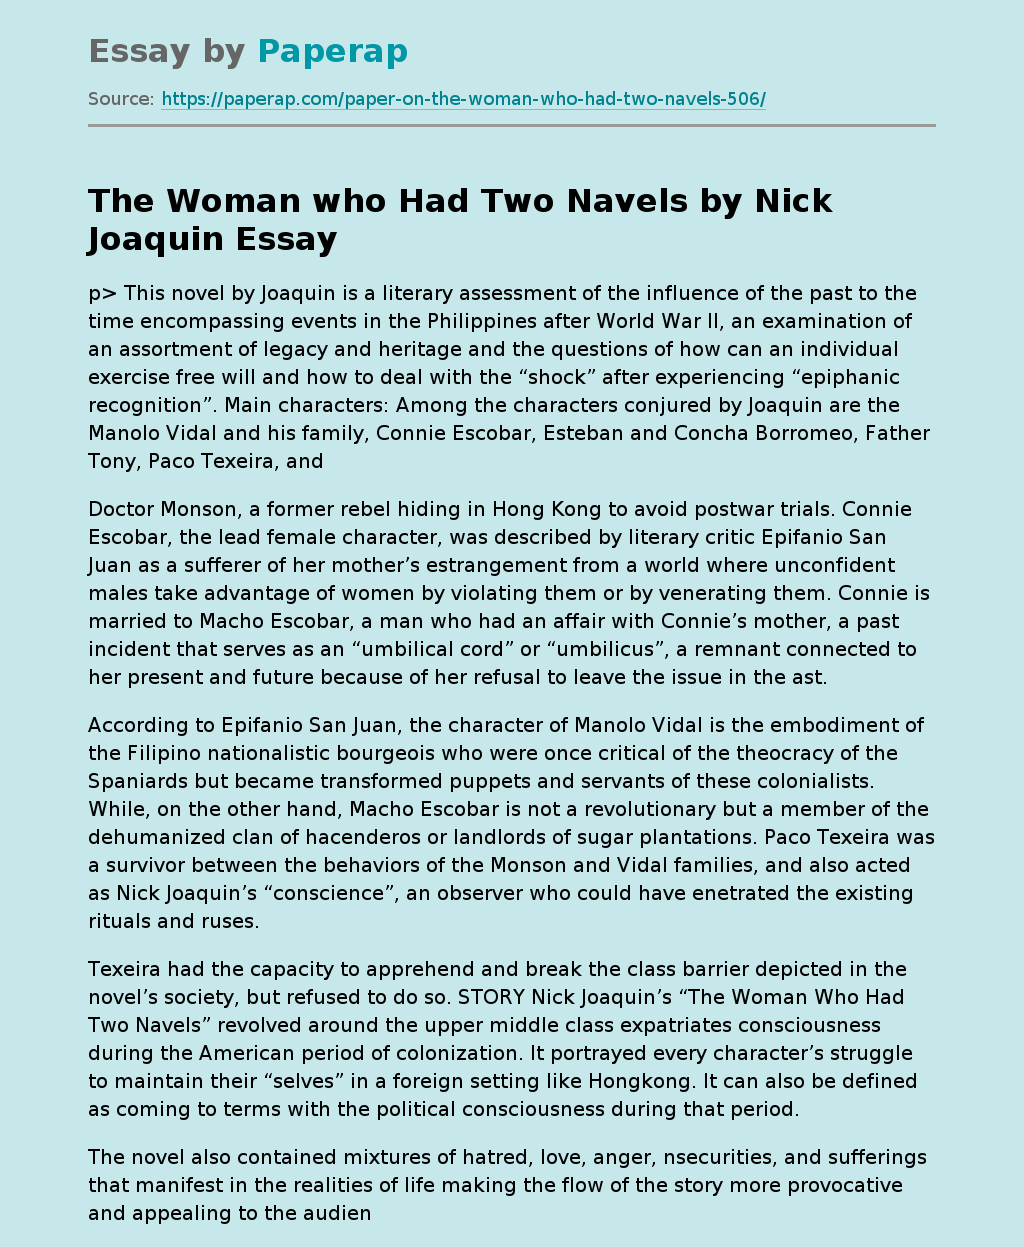 The Woman who Had Two Navels by Nick Joaquin